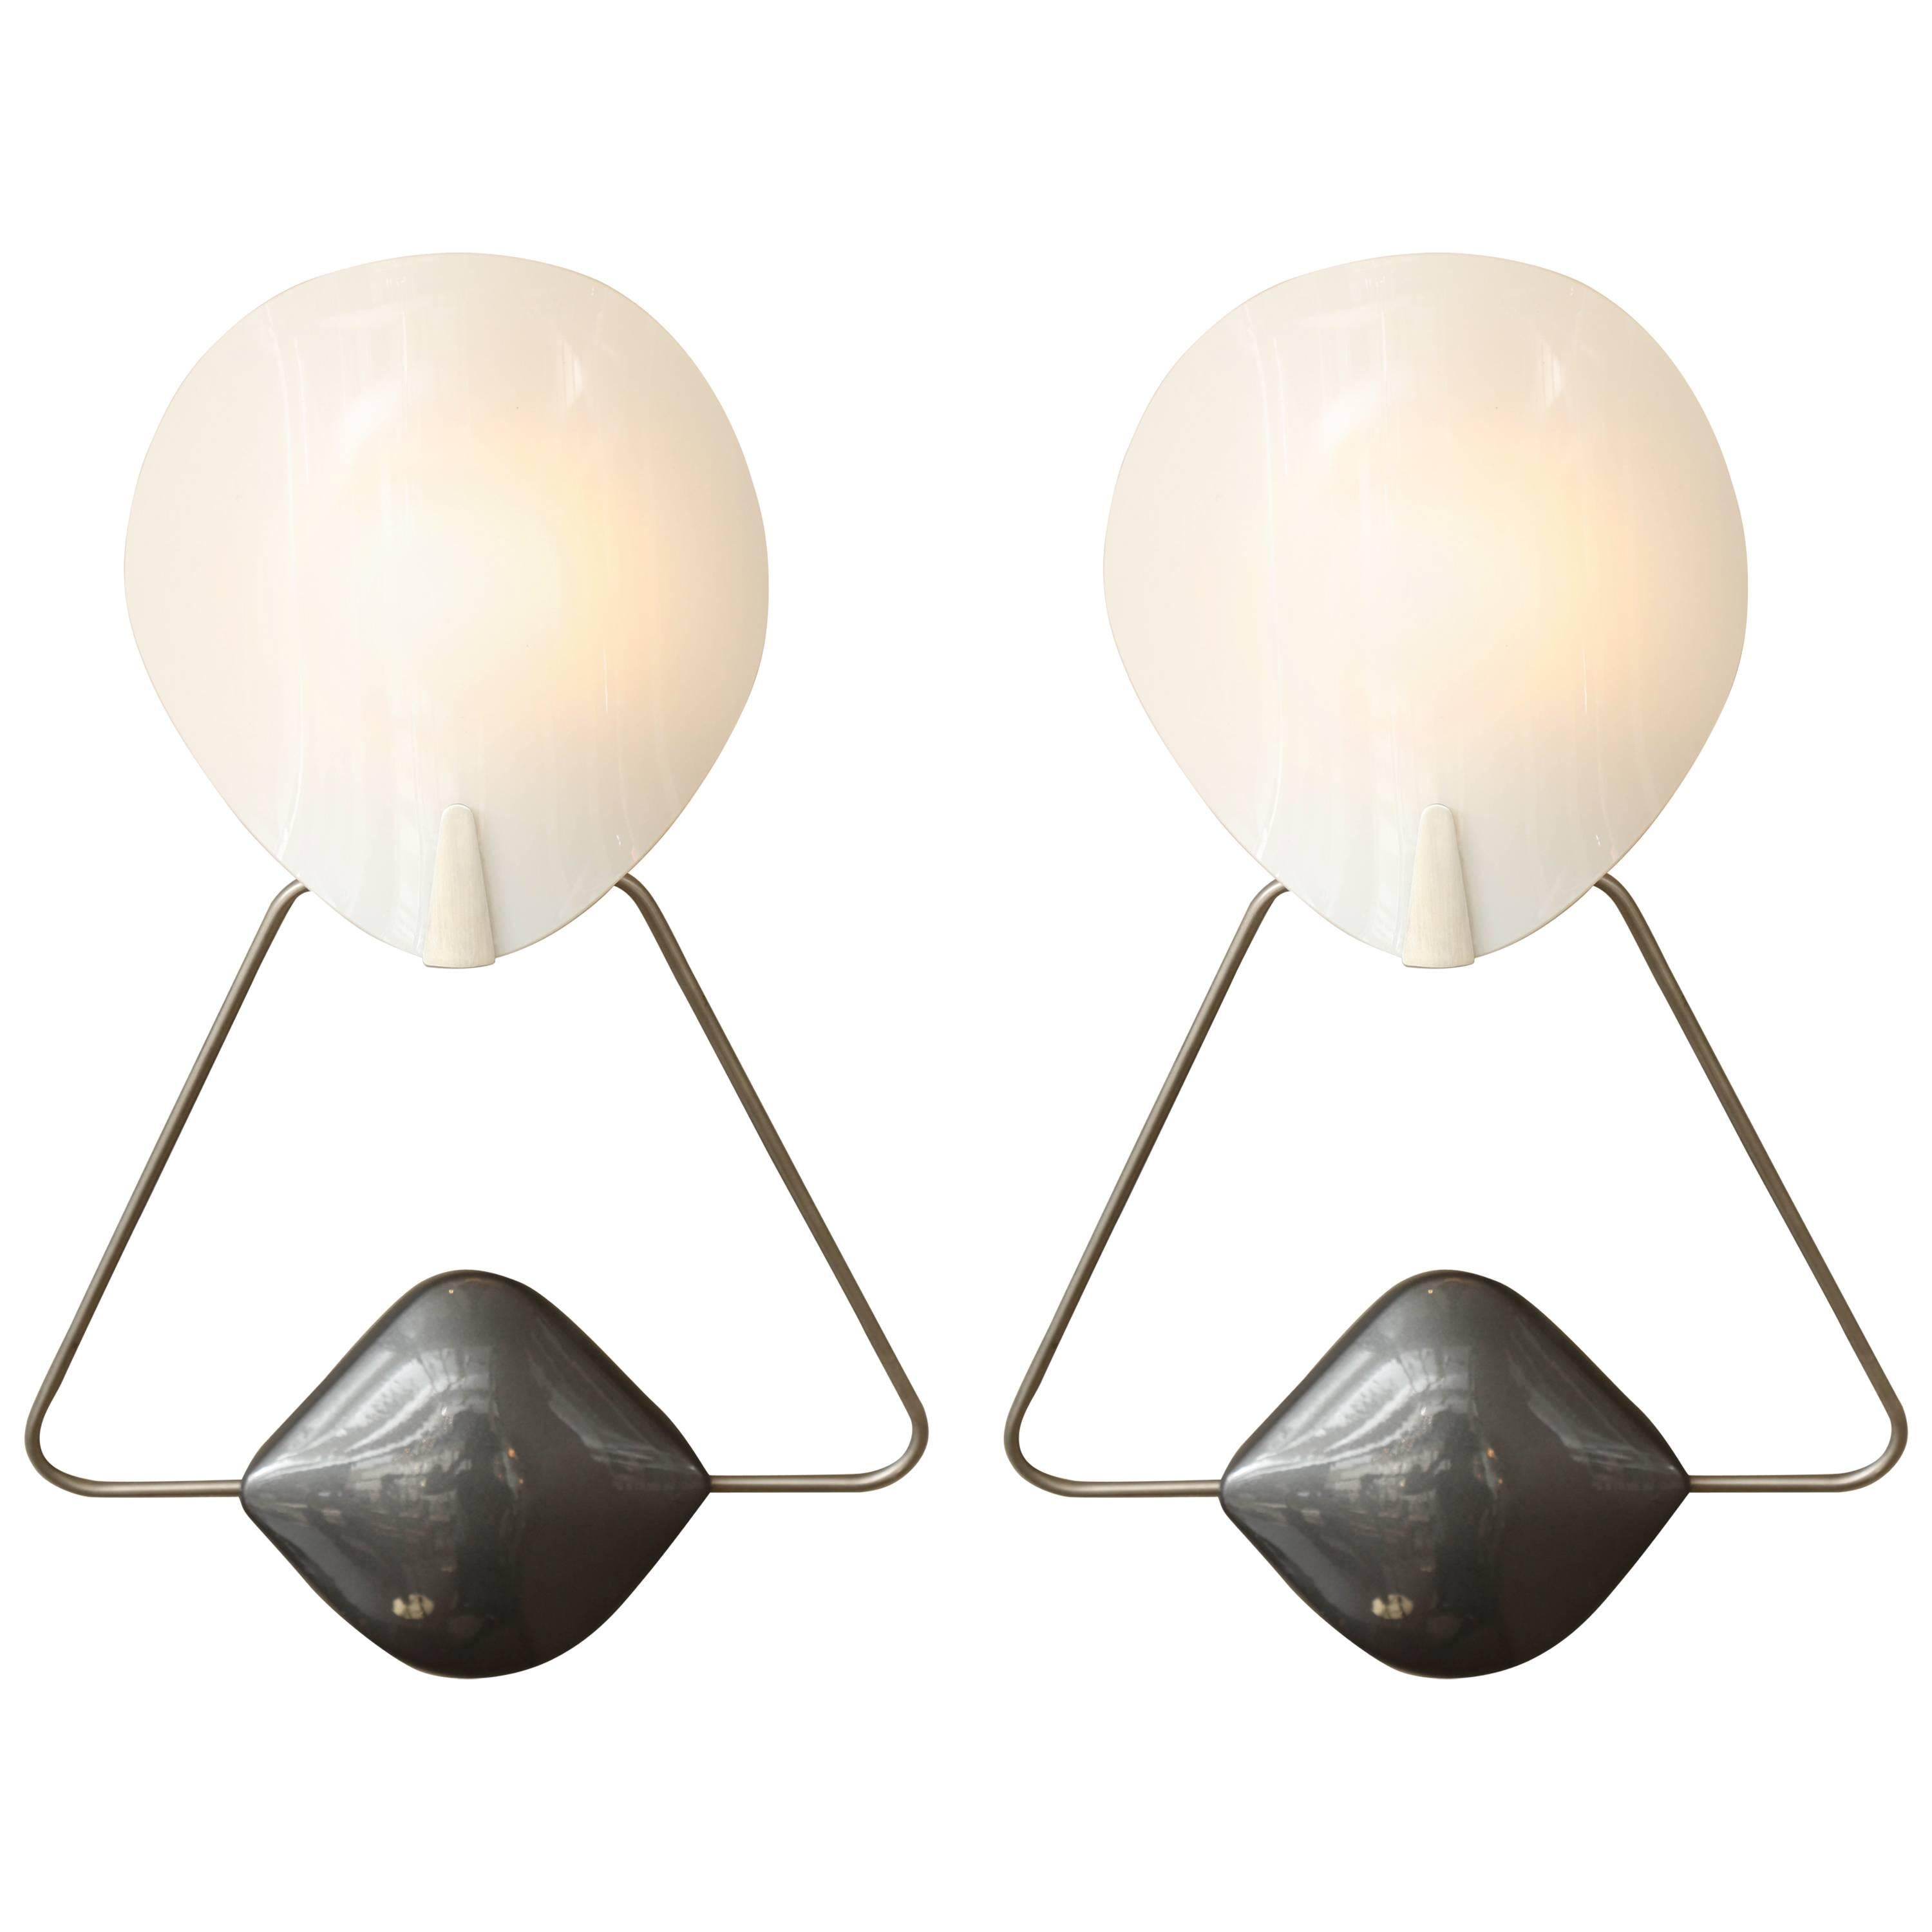 Pair of "Bali" Sconces by Paolo Rizzatto for Arteluce For Sale